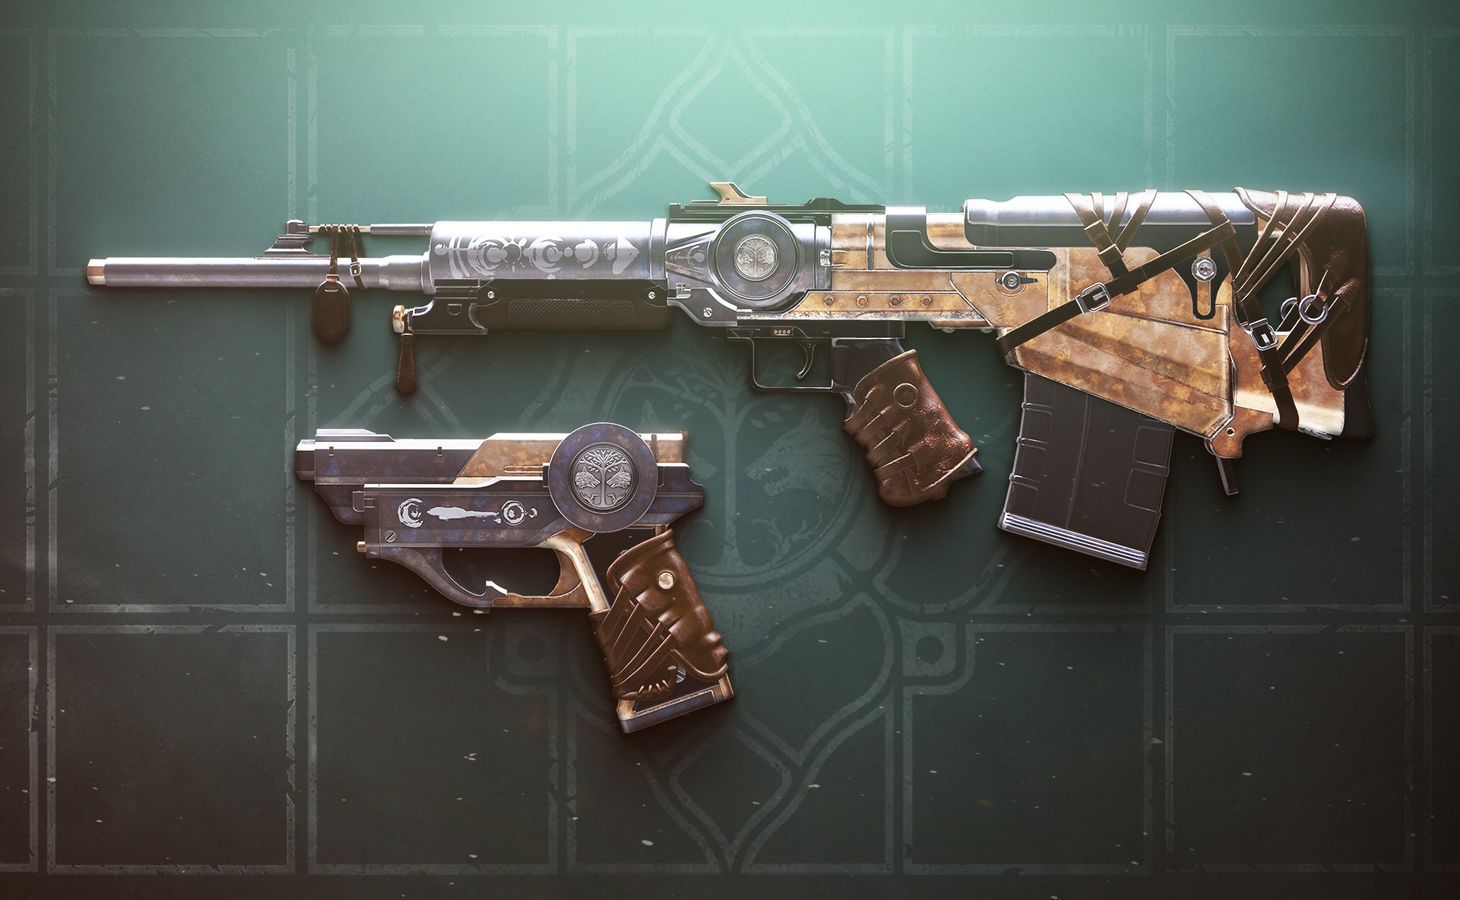 Image of weapons from Destiny 2, showing the side profile of Forge's Pledge and Peacebond.